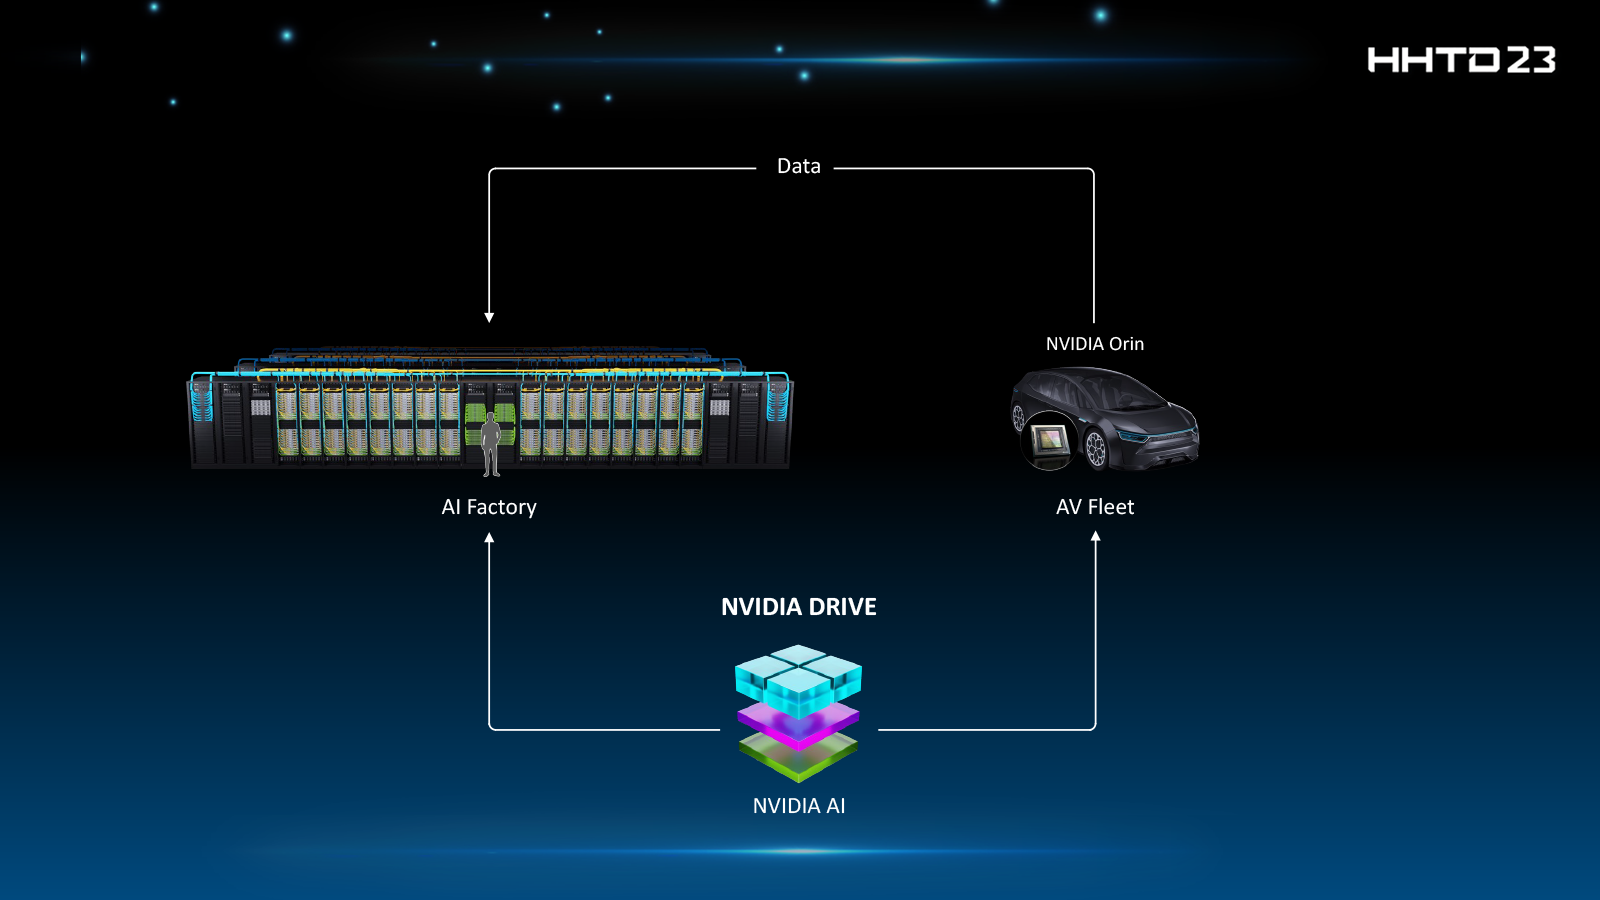 Nvidia and Foxconn to collaborate on AI data factories and smarter self-driving cars